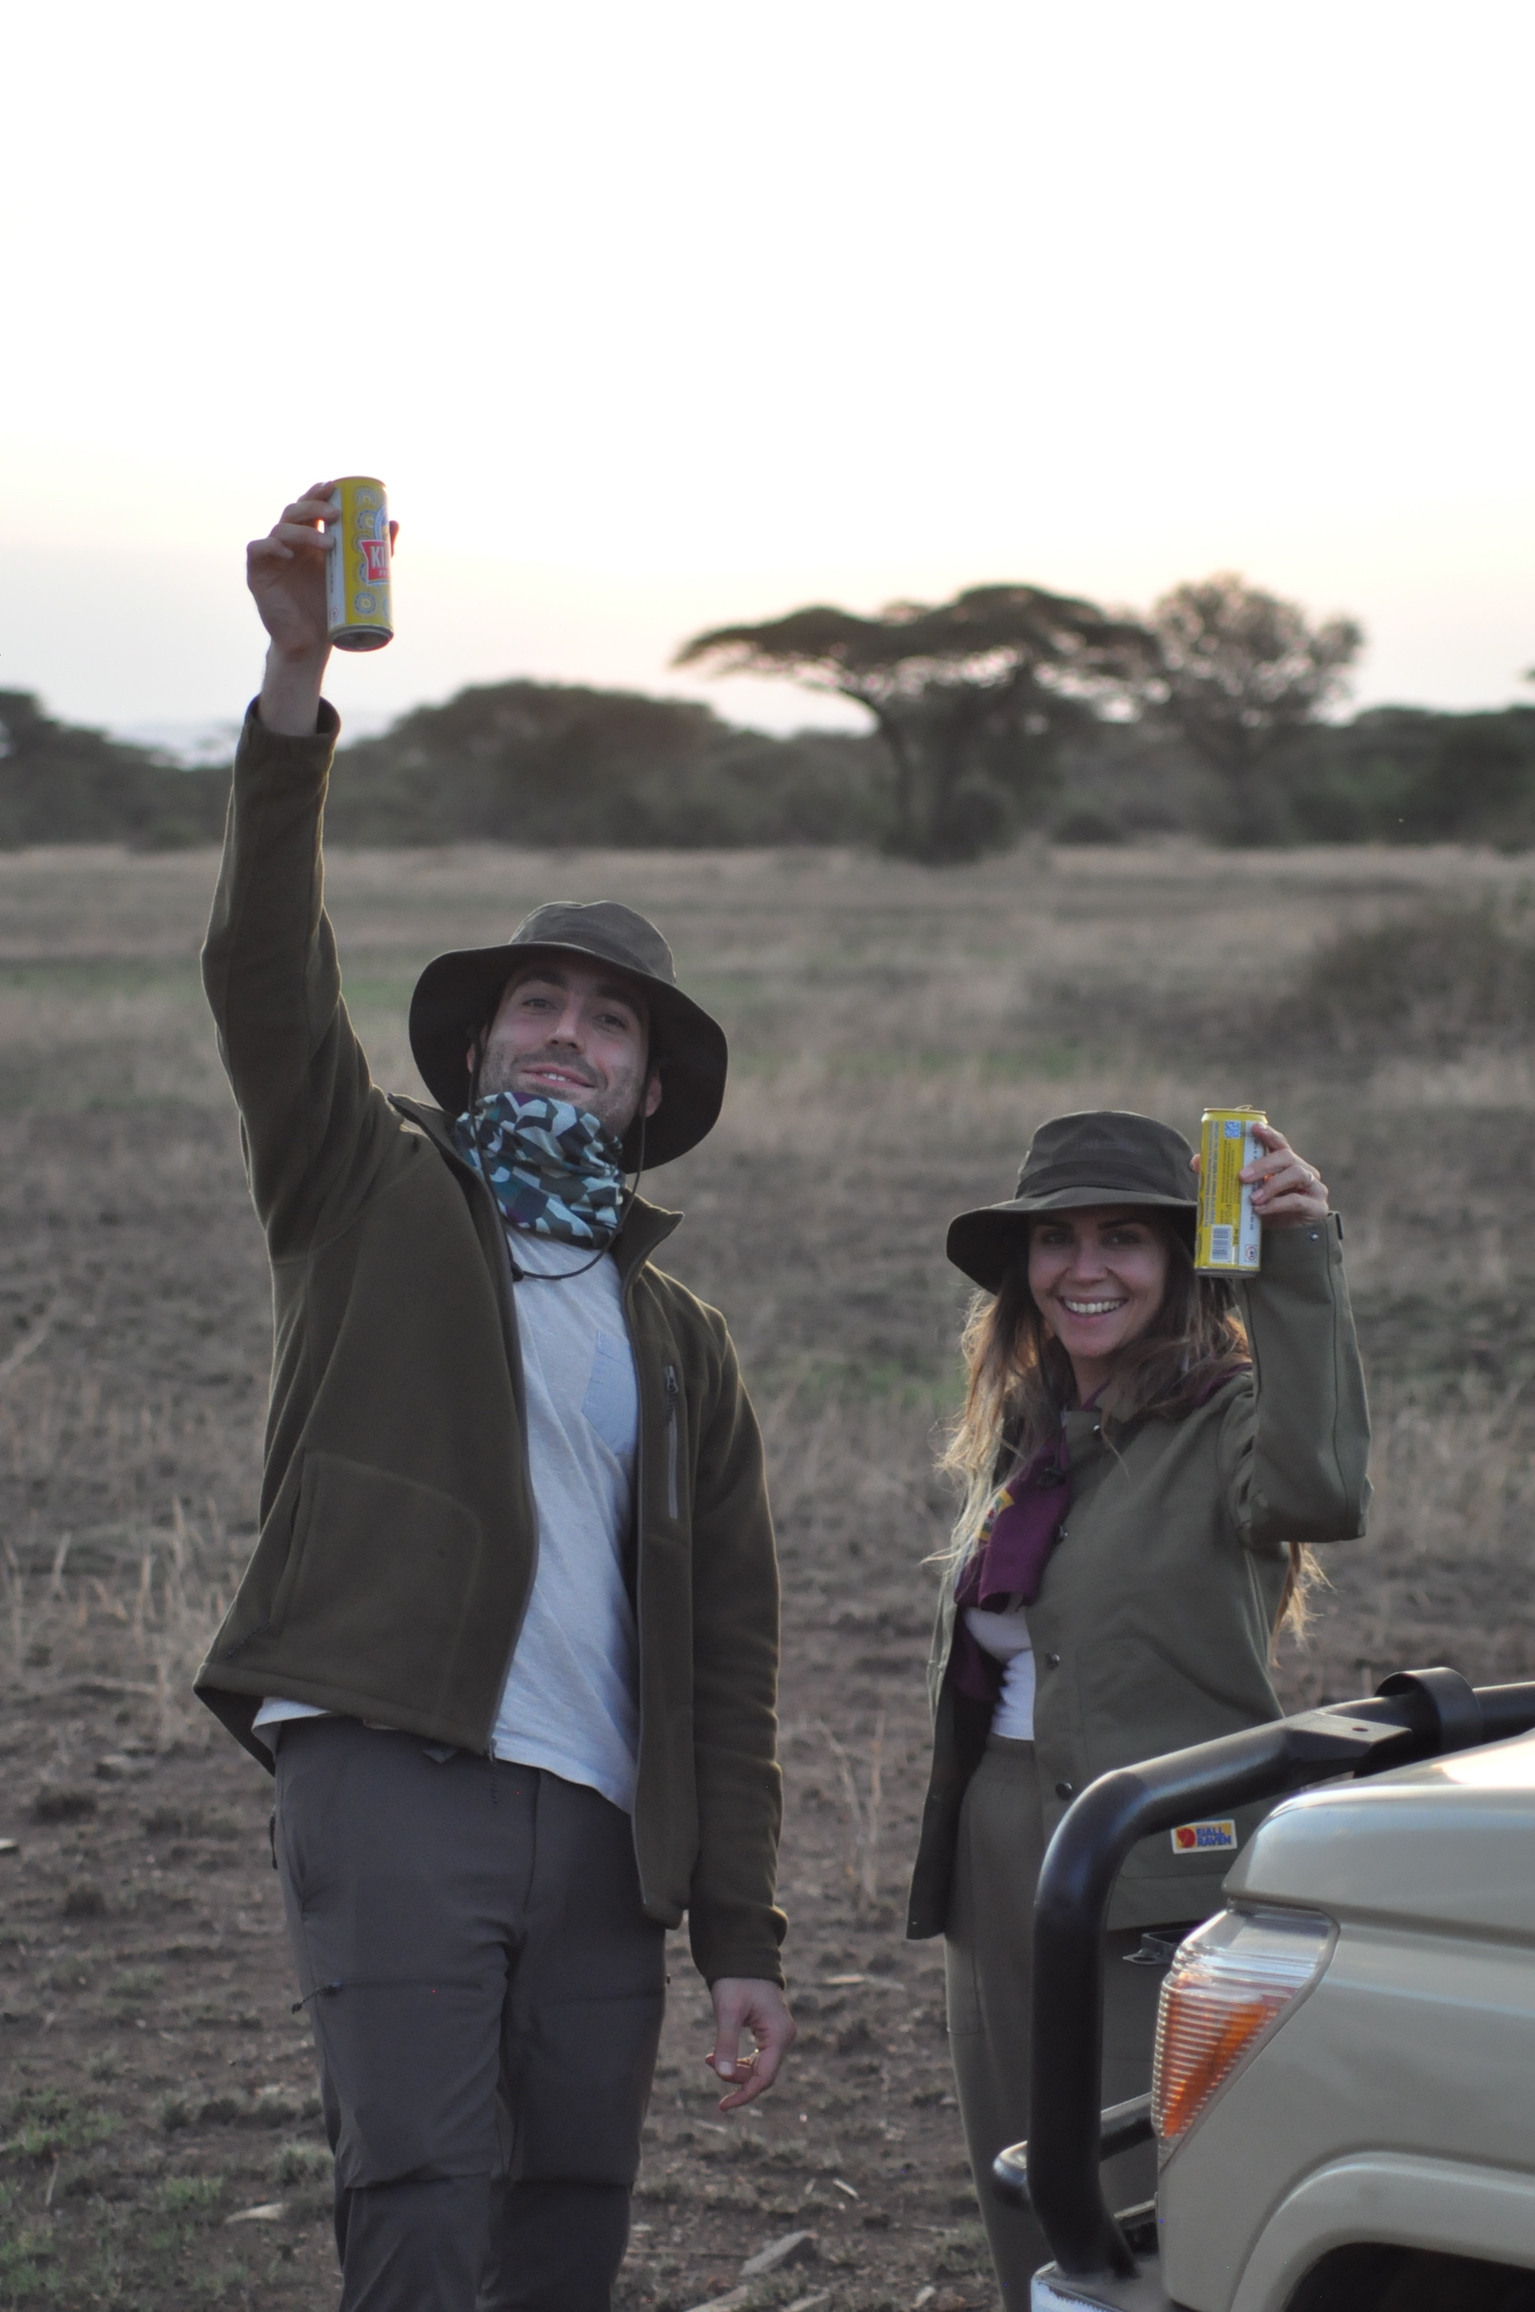 Our guests enjoying a drink on their private safari in Tanzania